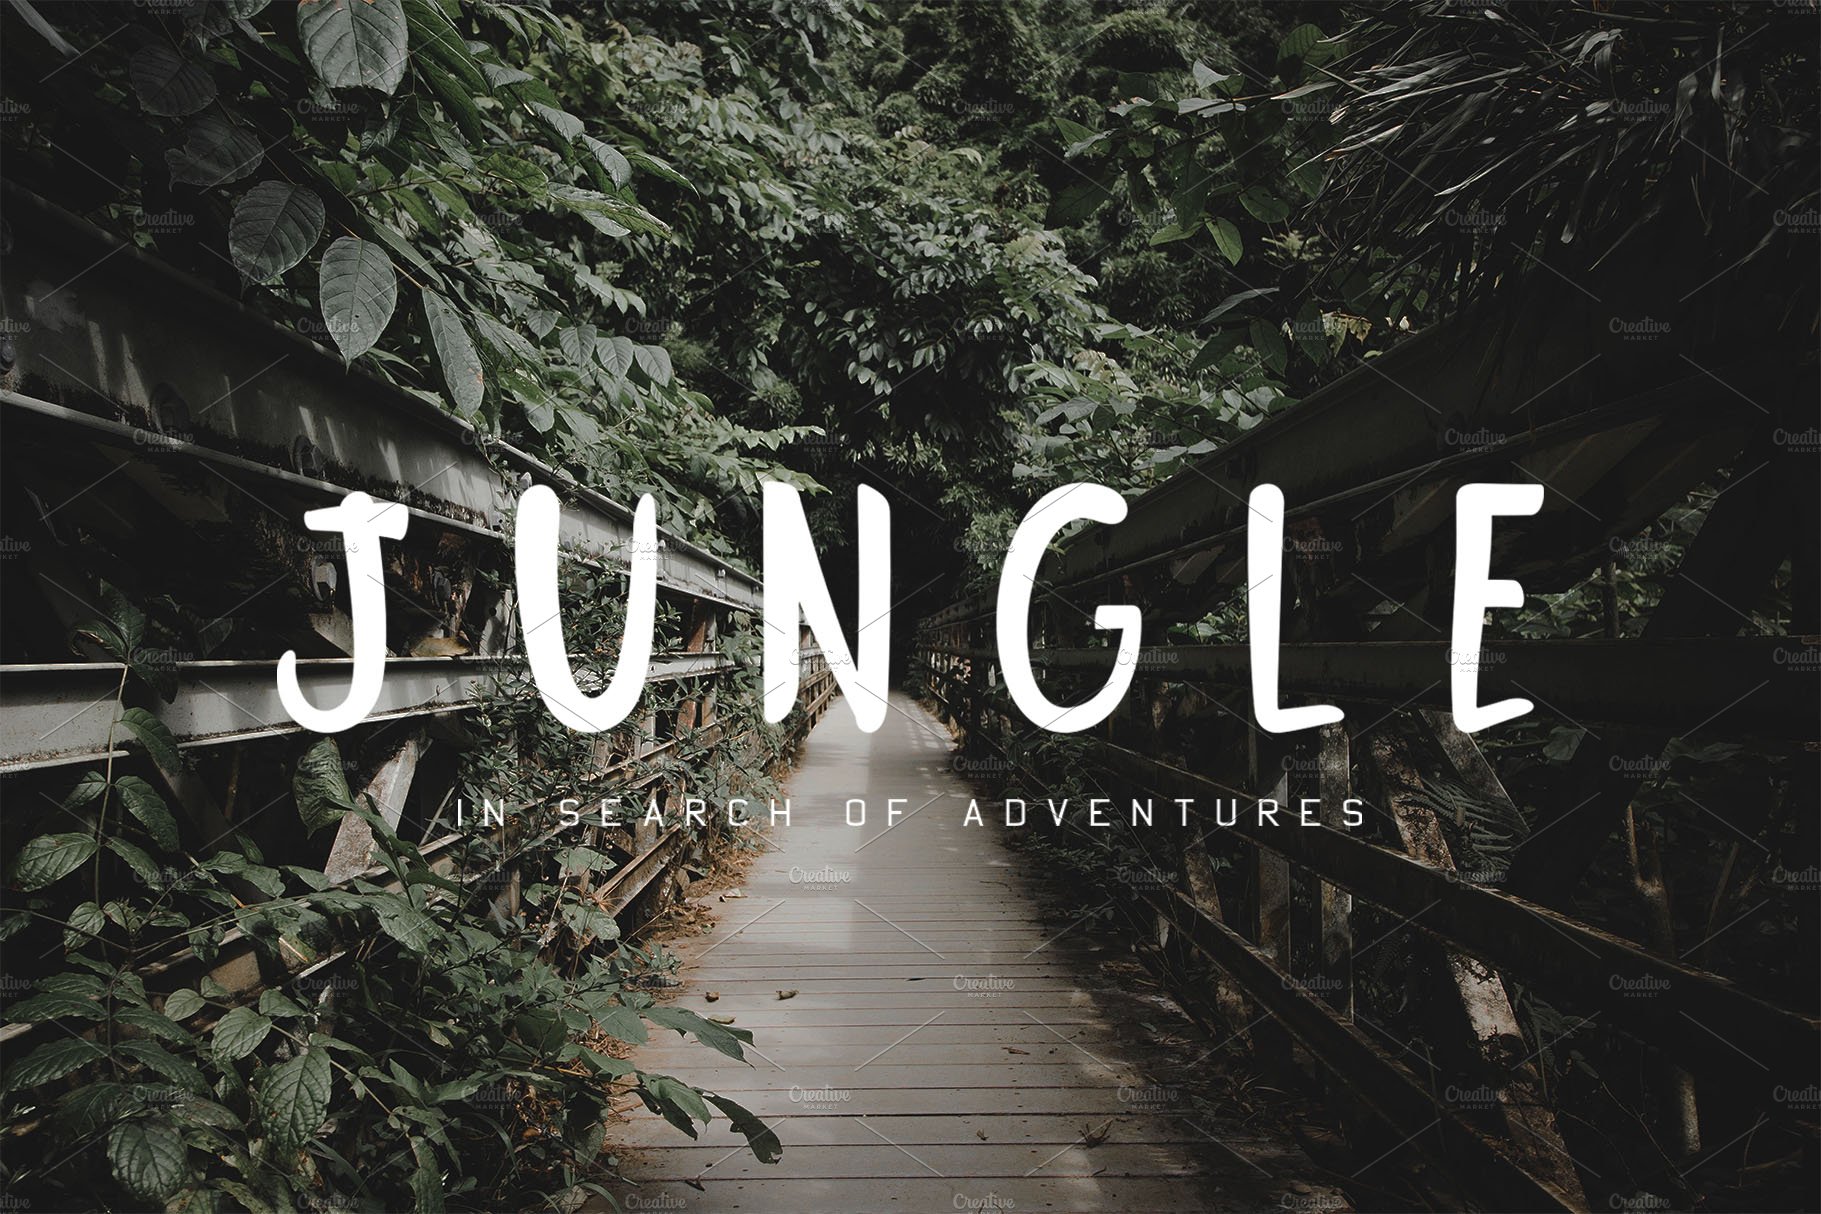 Jungle Display Font cover image.